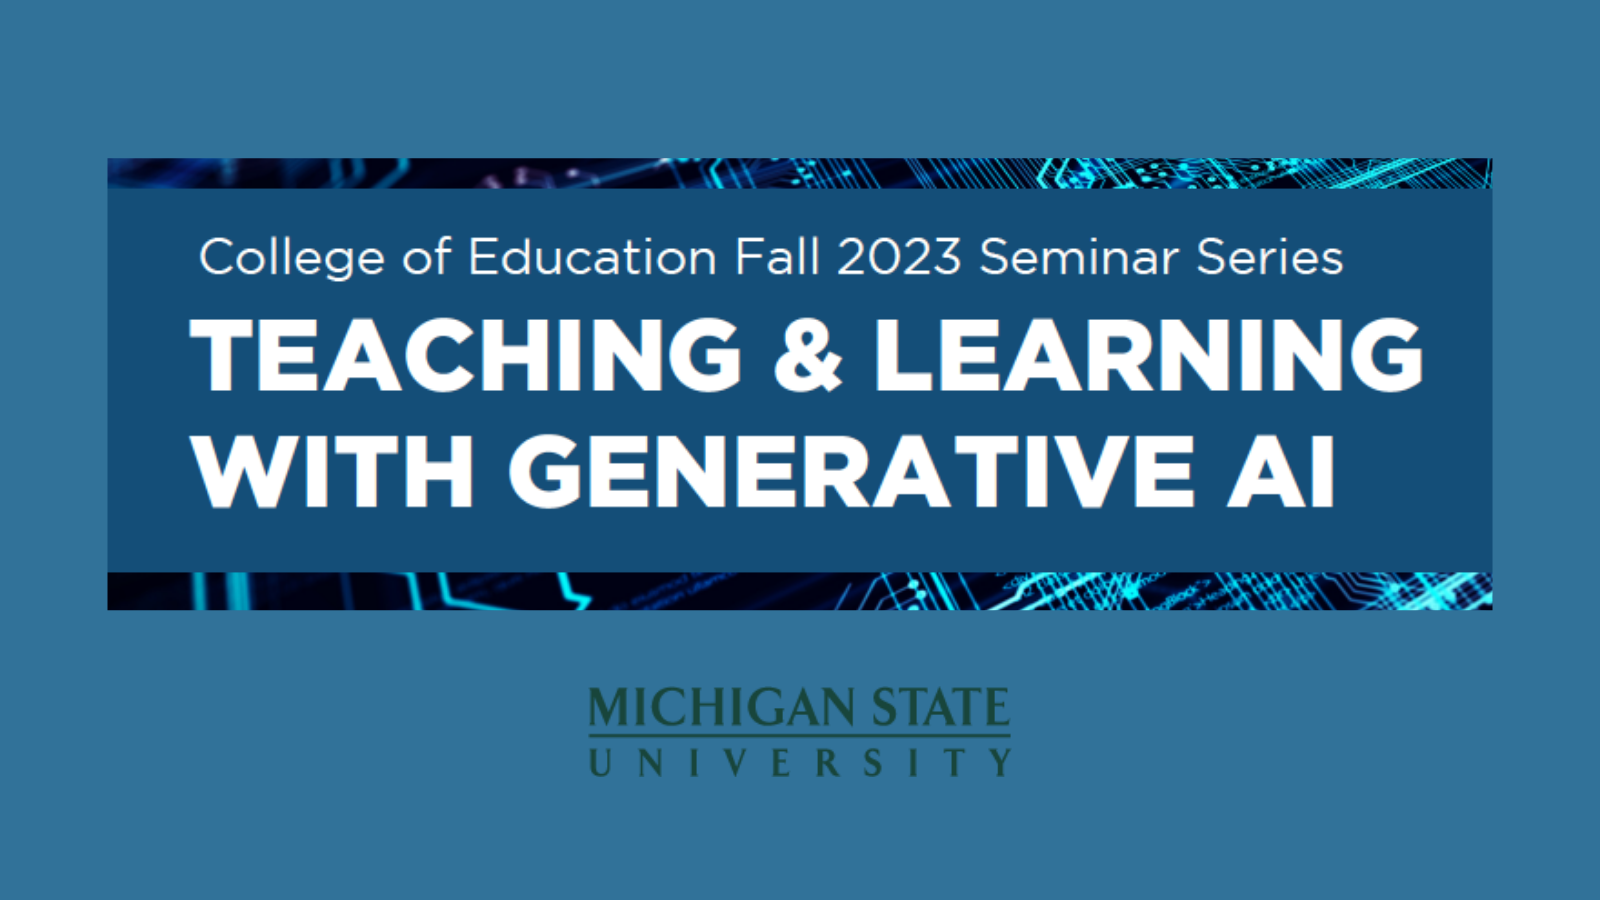 College of Education Fall 2023 Seminar Series; Teaching & Learning with Generative AI